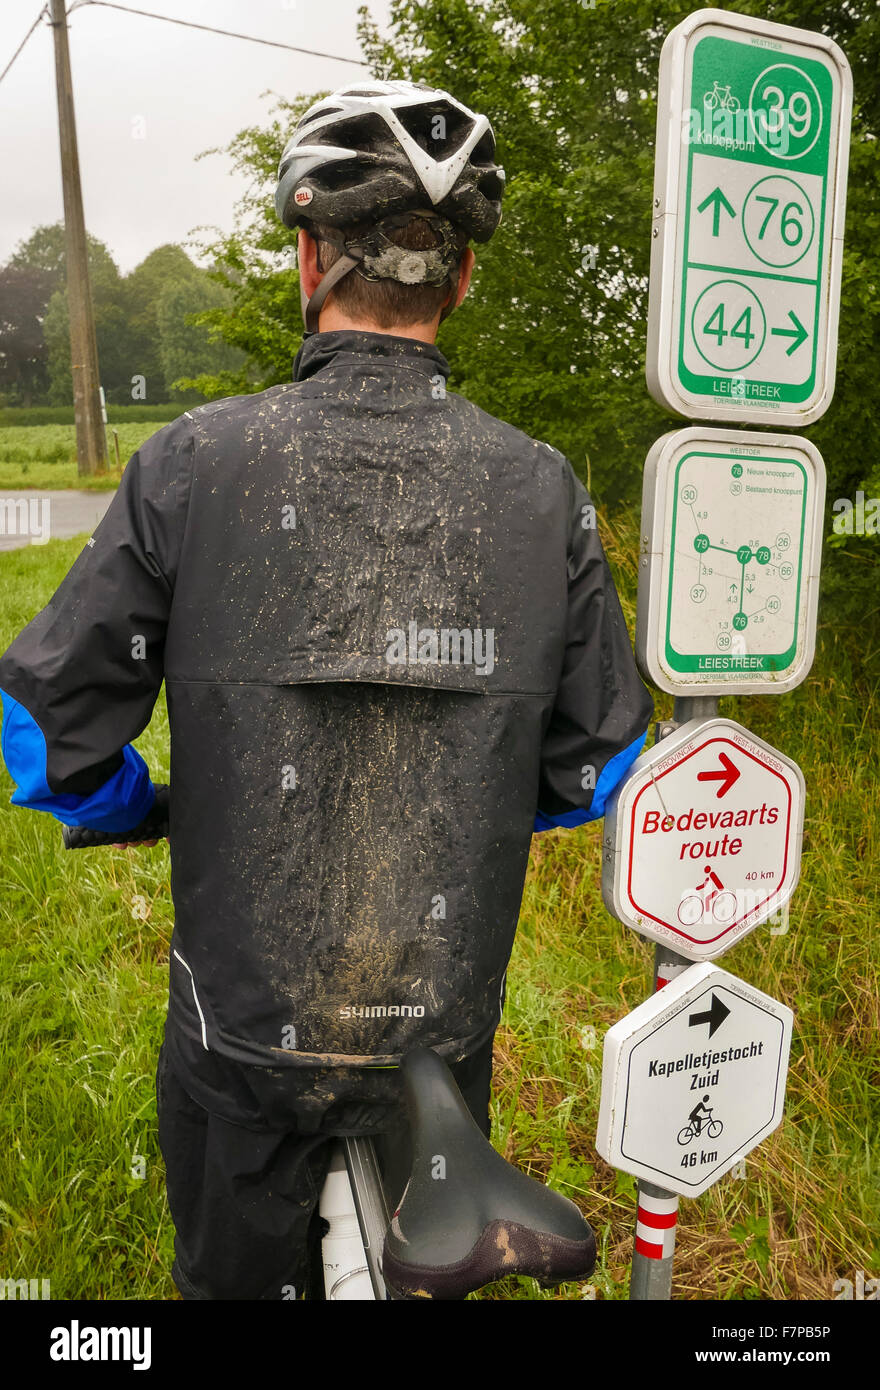 FLANDERS, BELGIUM - Bicycle rider with mud on back, on bike trail with cycling route signs. Stock Photo